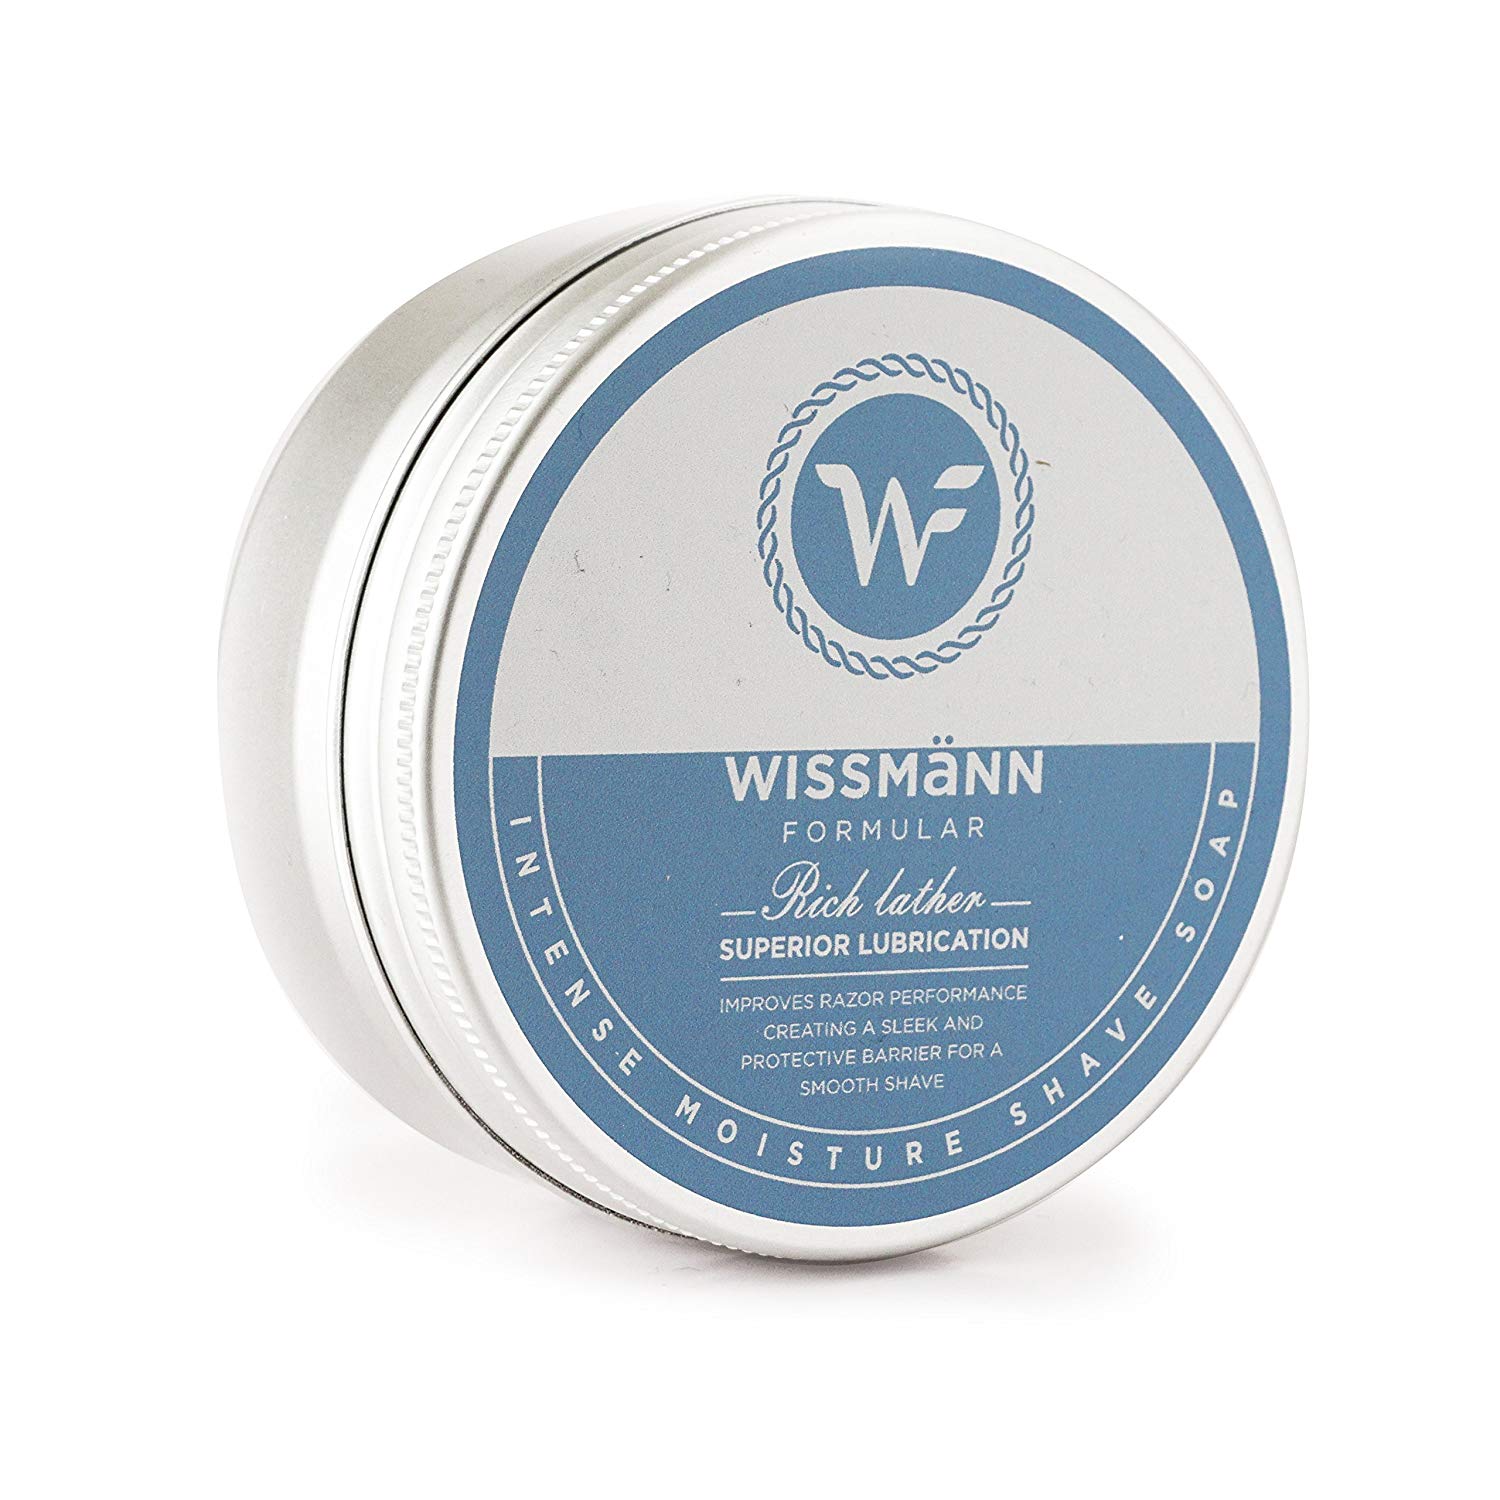 Shaving and Personal Care Products Logo - Wissmann formular Intense Moisture Shaving soap with Dead Sea Mud ...